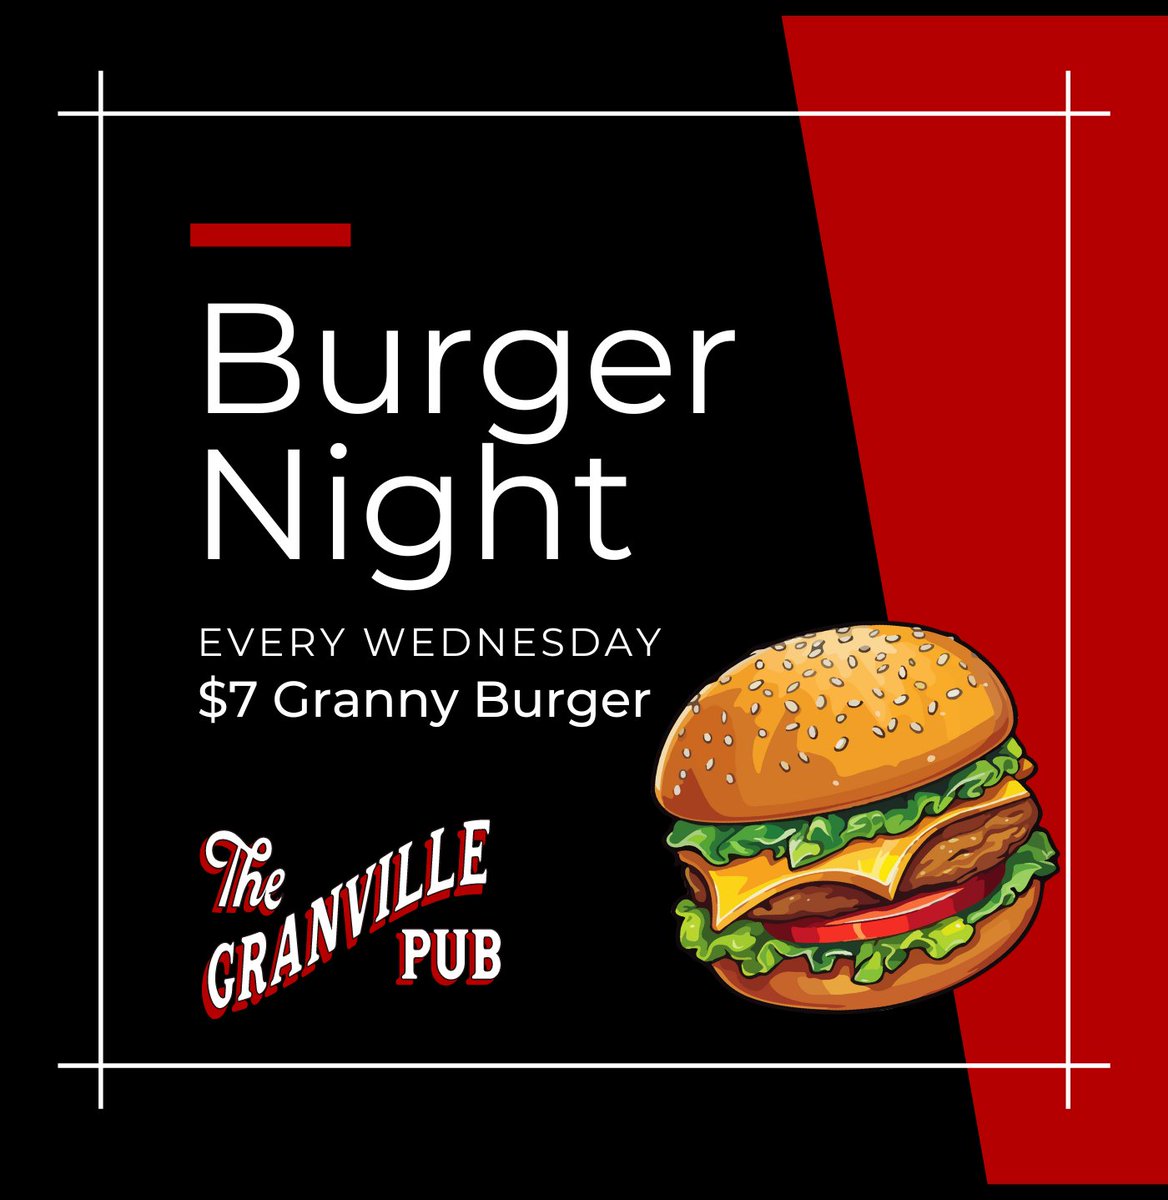 We've got your cravings covered tonight with our $7 GRANVILLE BURGER!!!! 🔥🔥🍔🍔

*dine in only

#foodjunkie #foodielover #foodcravings  #universityoflouisville #louisvilleuniversity #universityoflouisvillecardinals #universityoflouisvillefootball